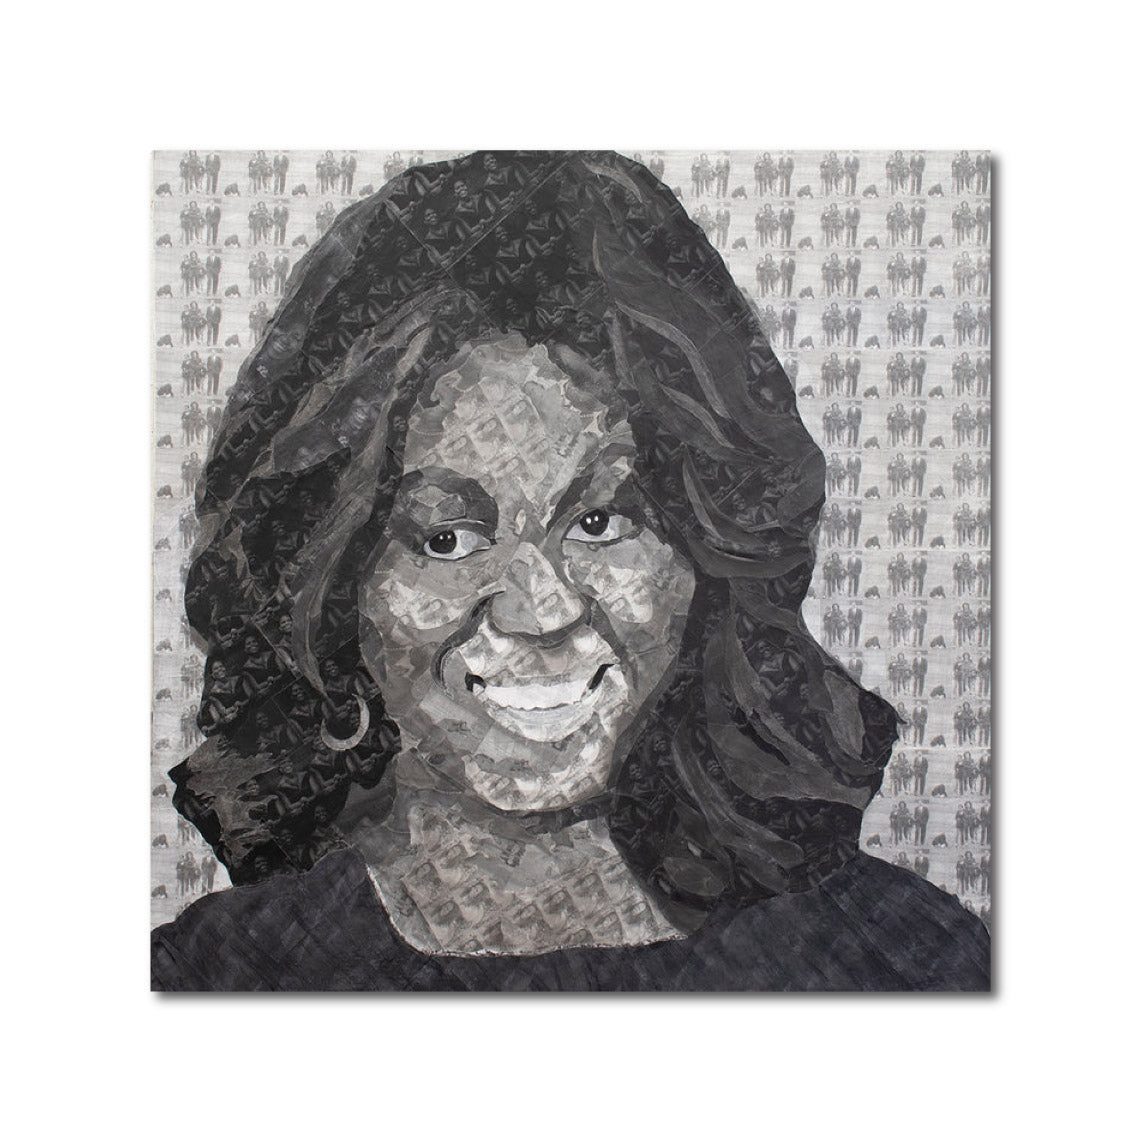 'FIRST LADY MICHELLE OBAMA' - Acrylic, graphite powder, and pencil on canvas